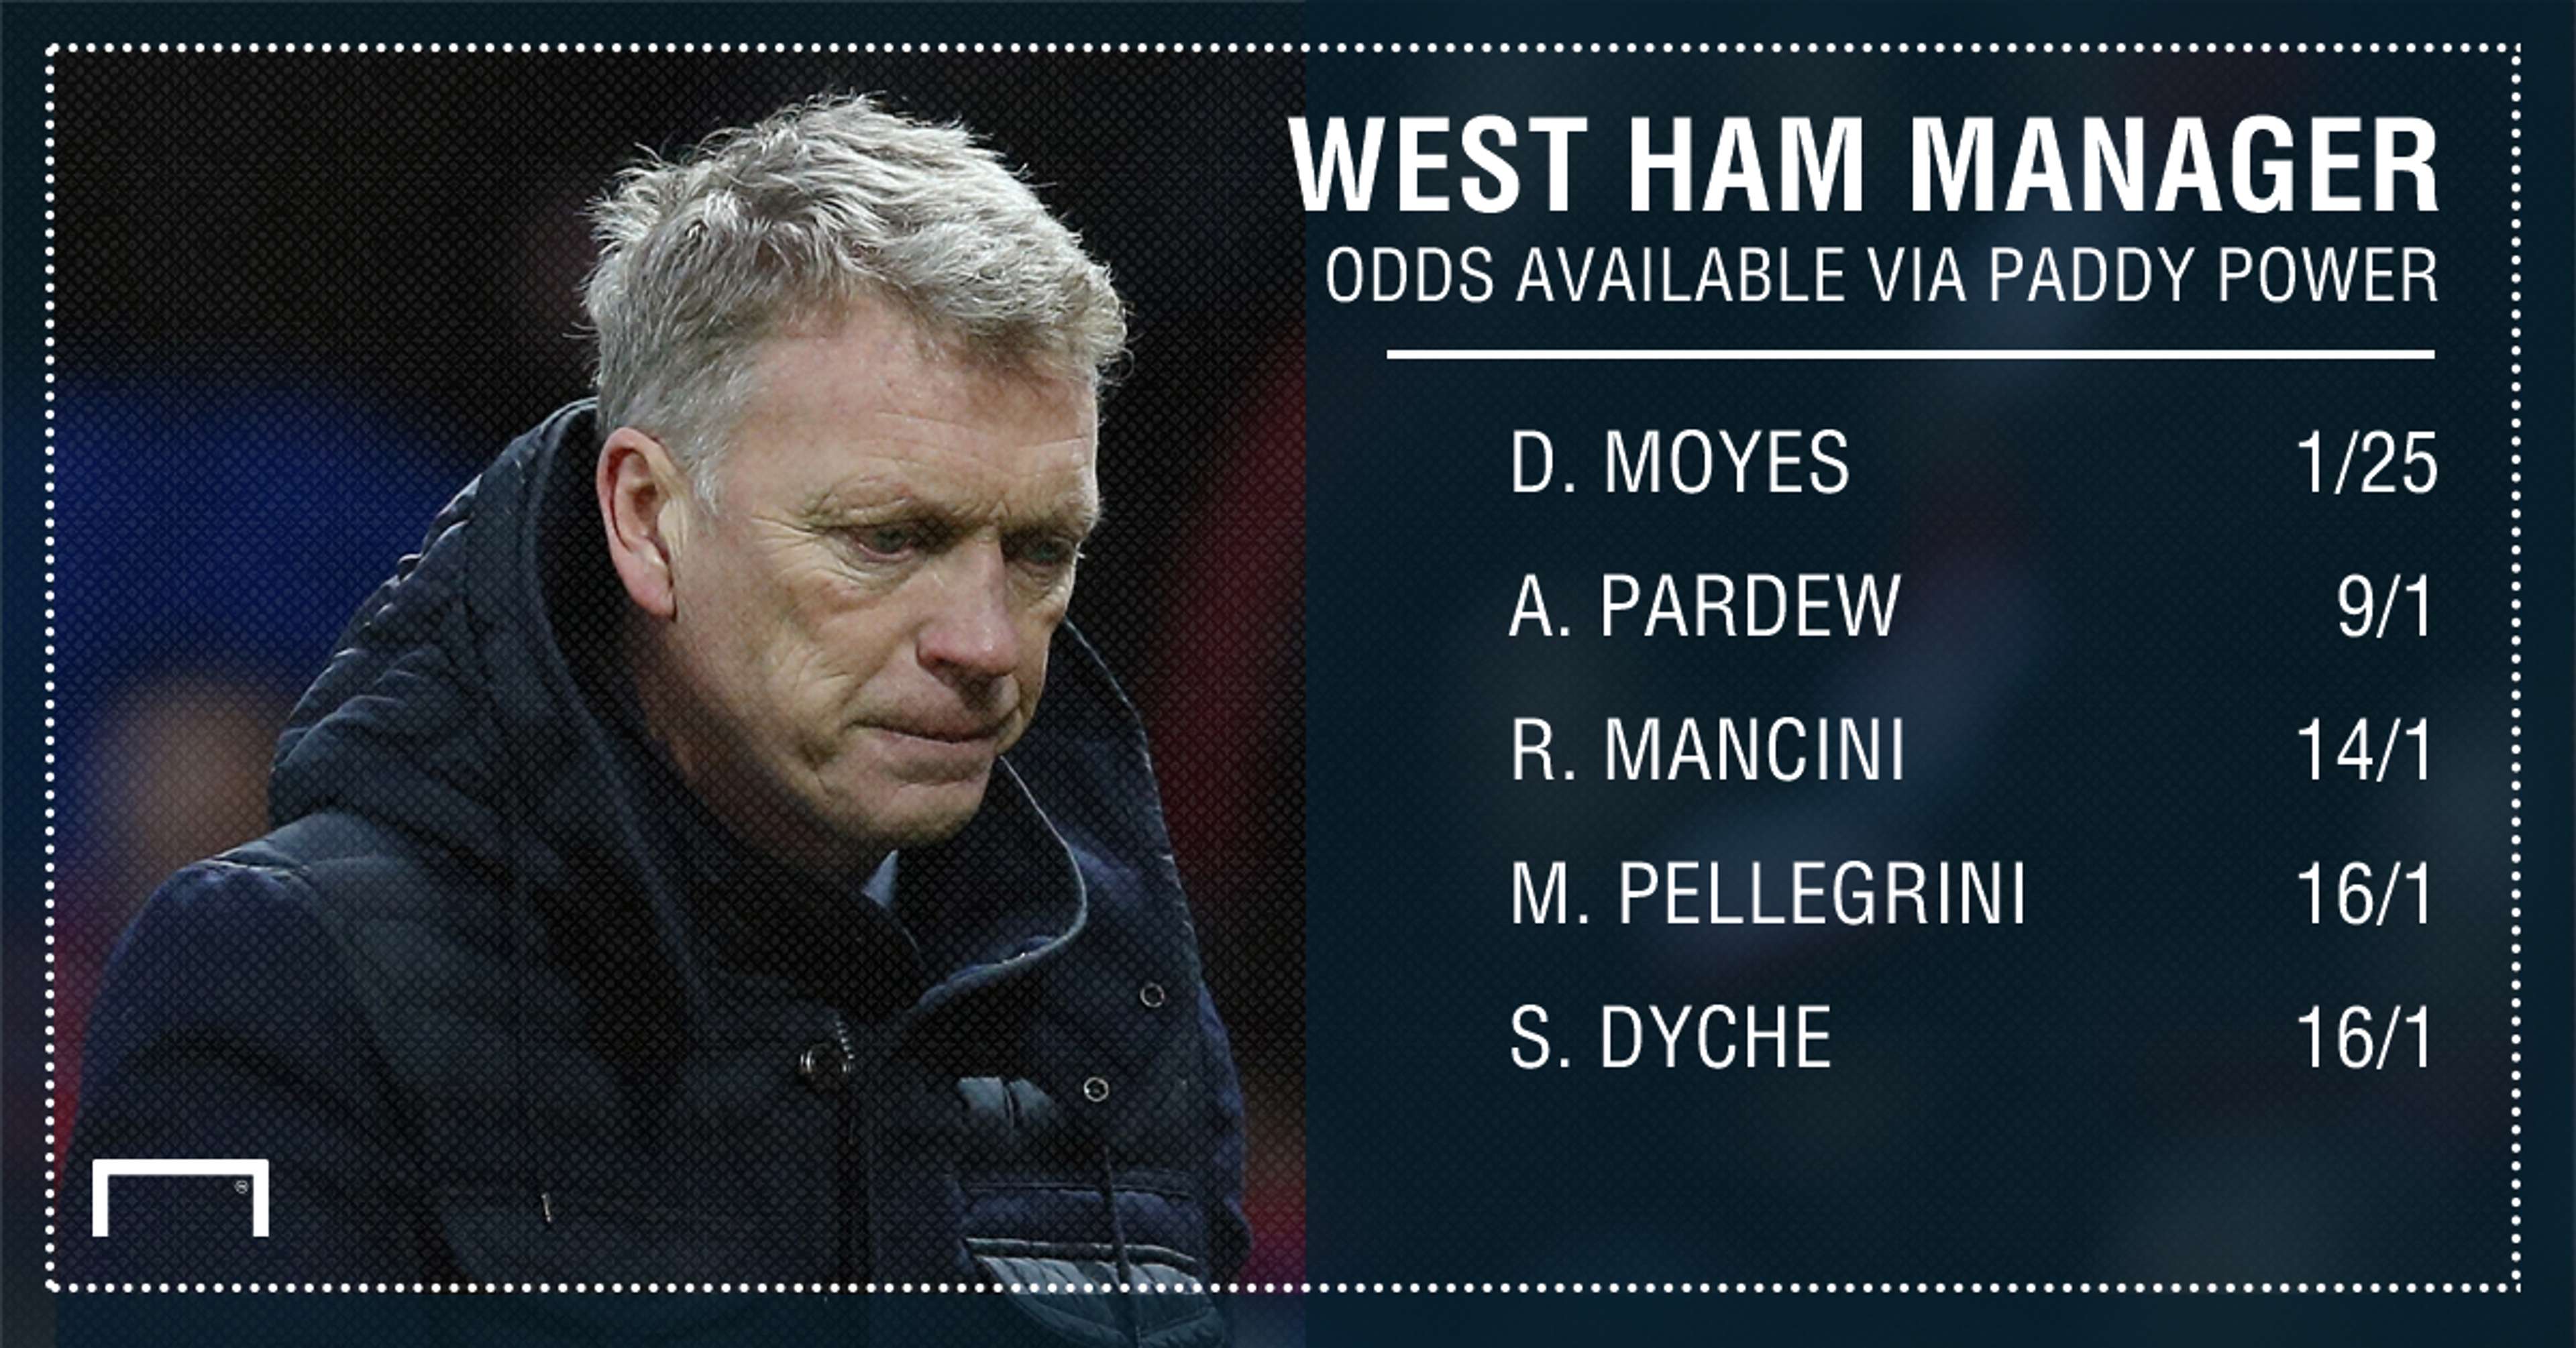 West Ham manager odds graphic